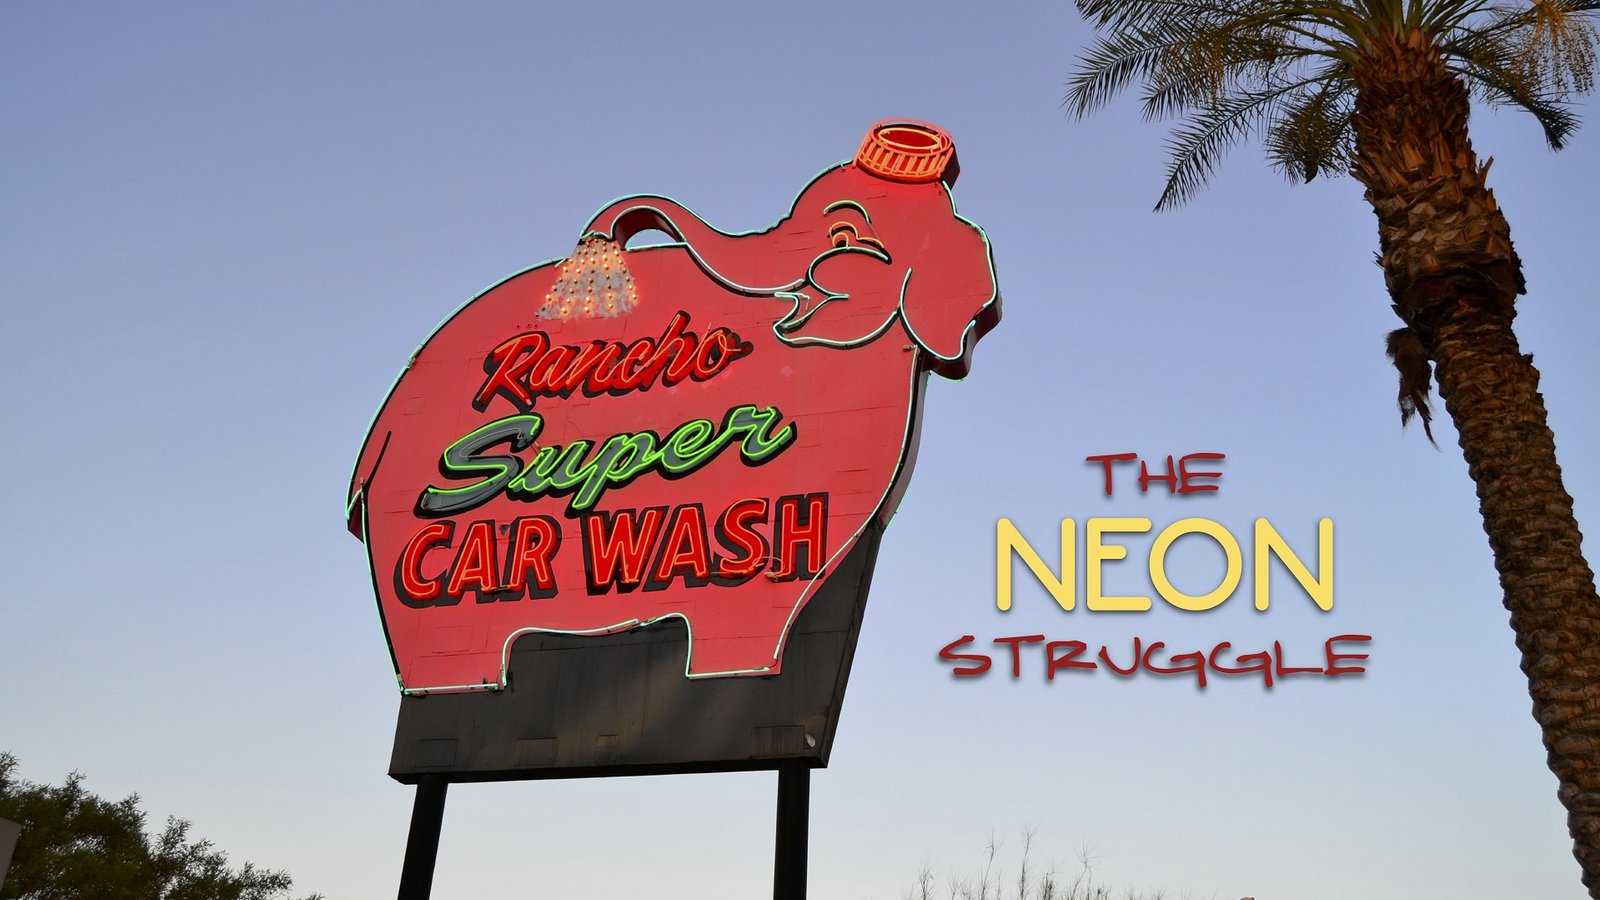 The Neon Struggle - The Gradual Extinction of the Neon Sign